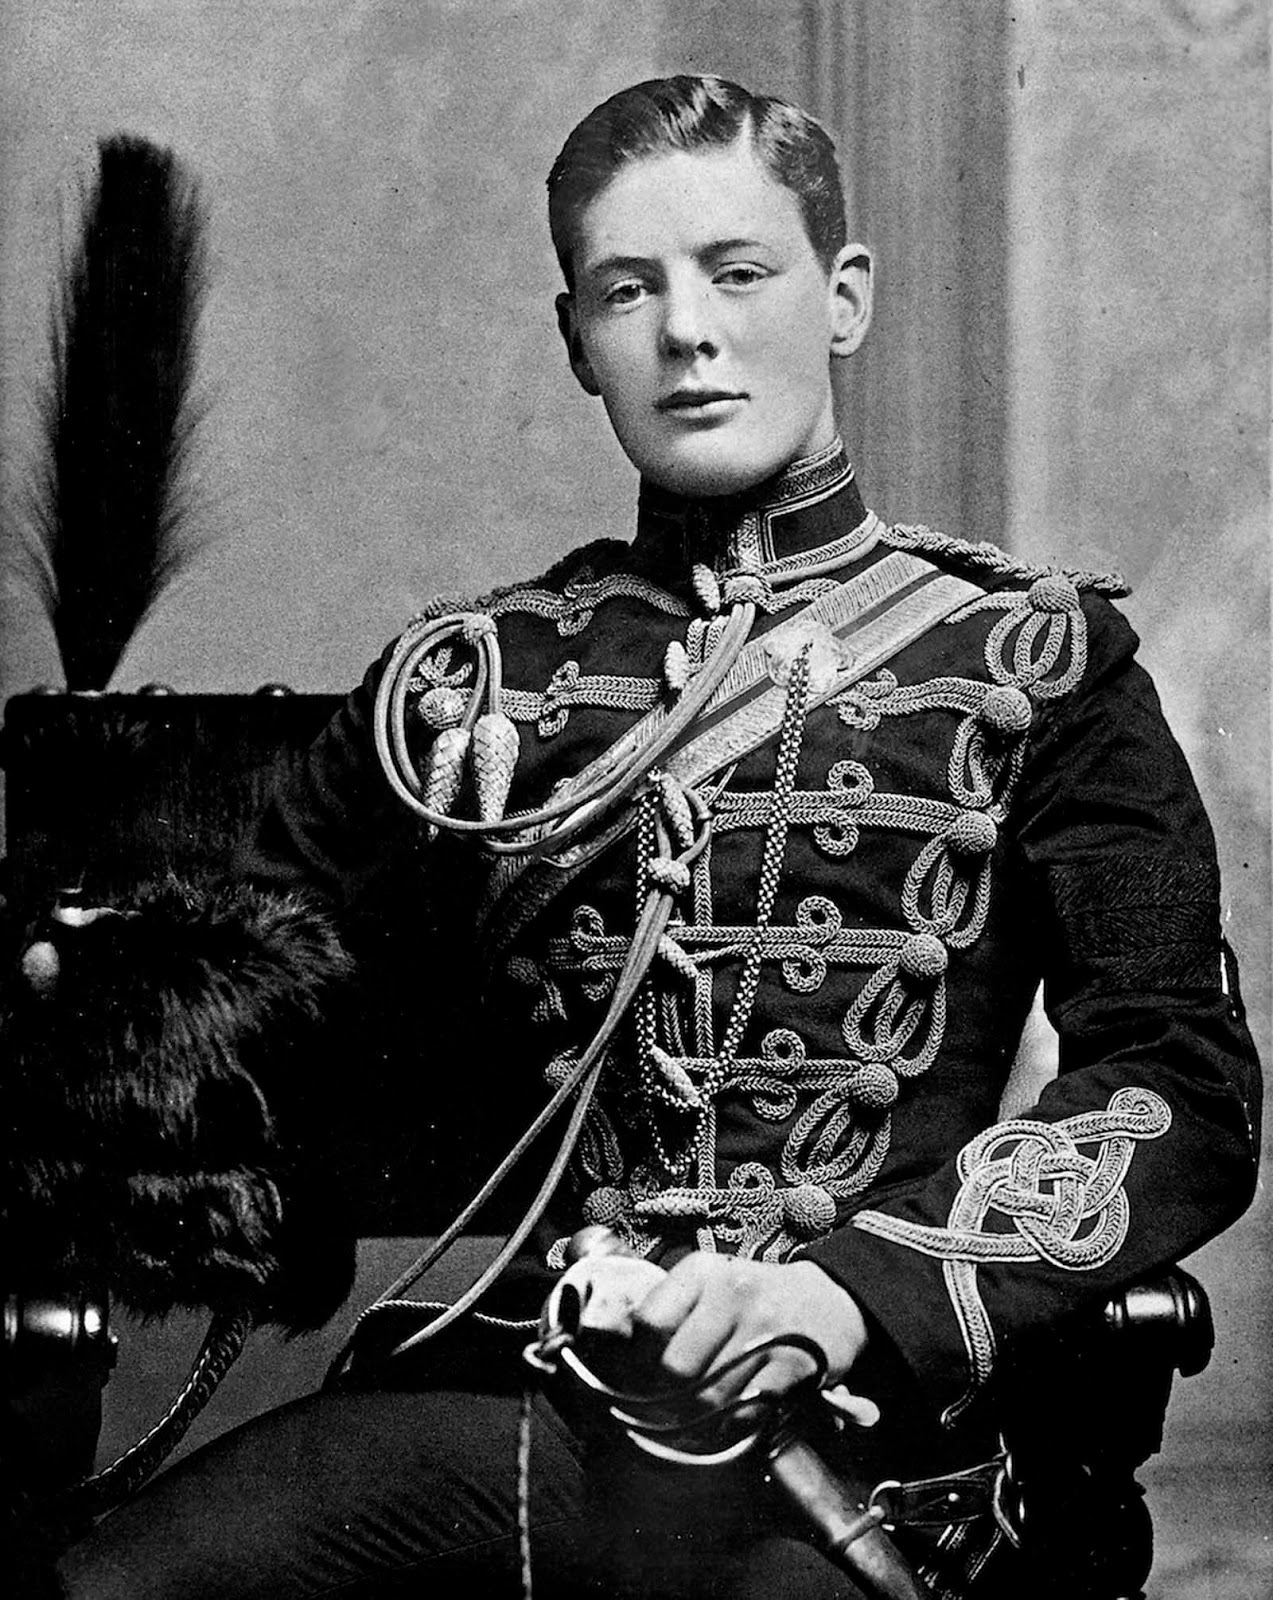 Young Winston Churchill, 1890s